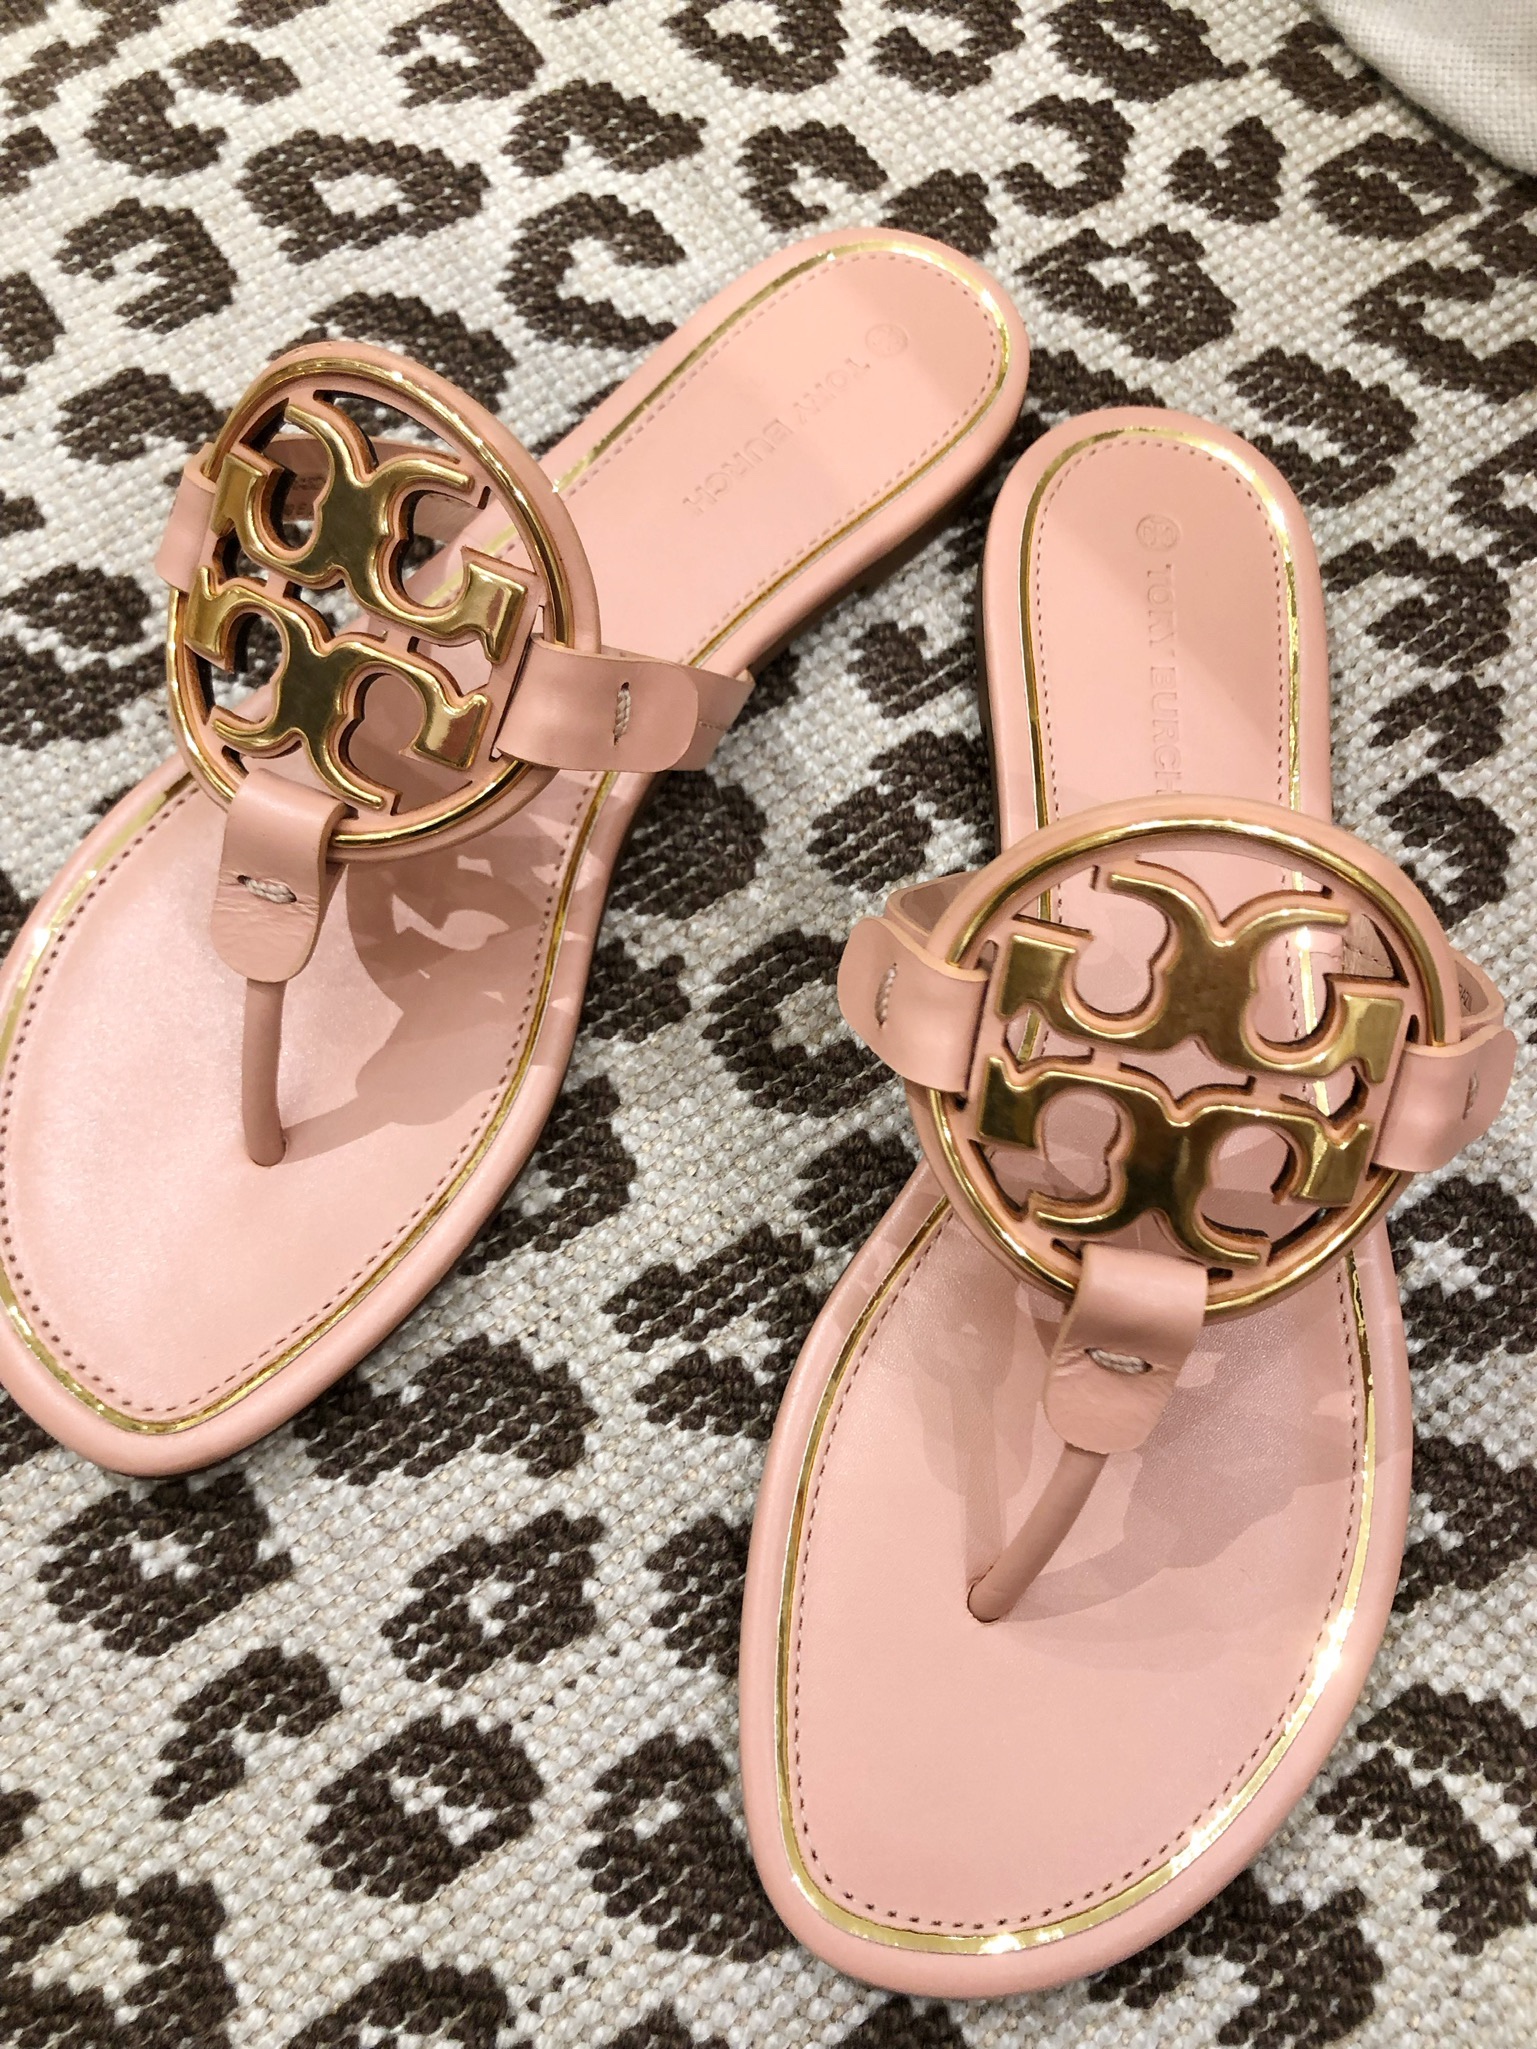 Tory Burch Holiday Sale 2020 | Save 30% Off + GIVEAWAY! - The Double ...